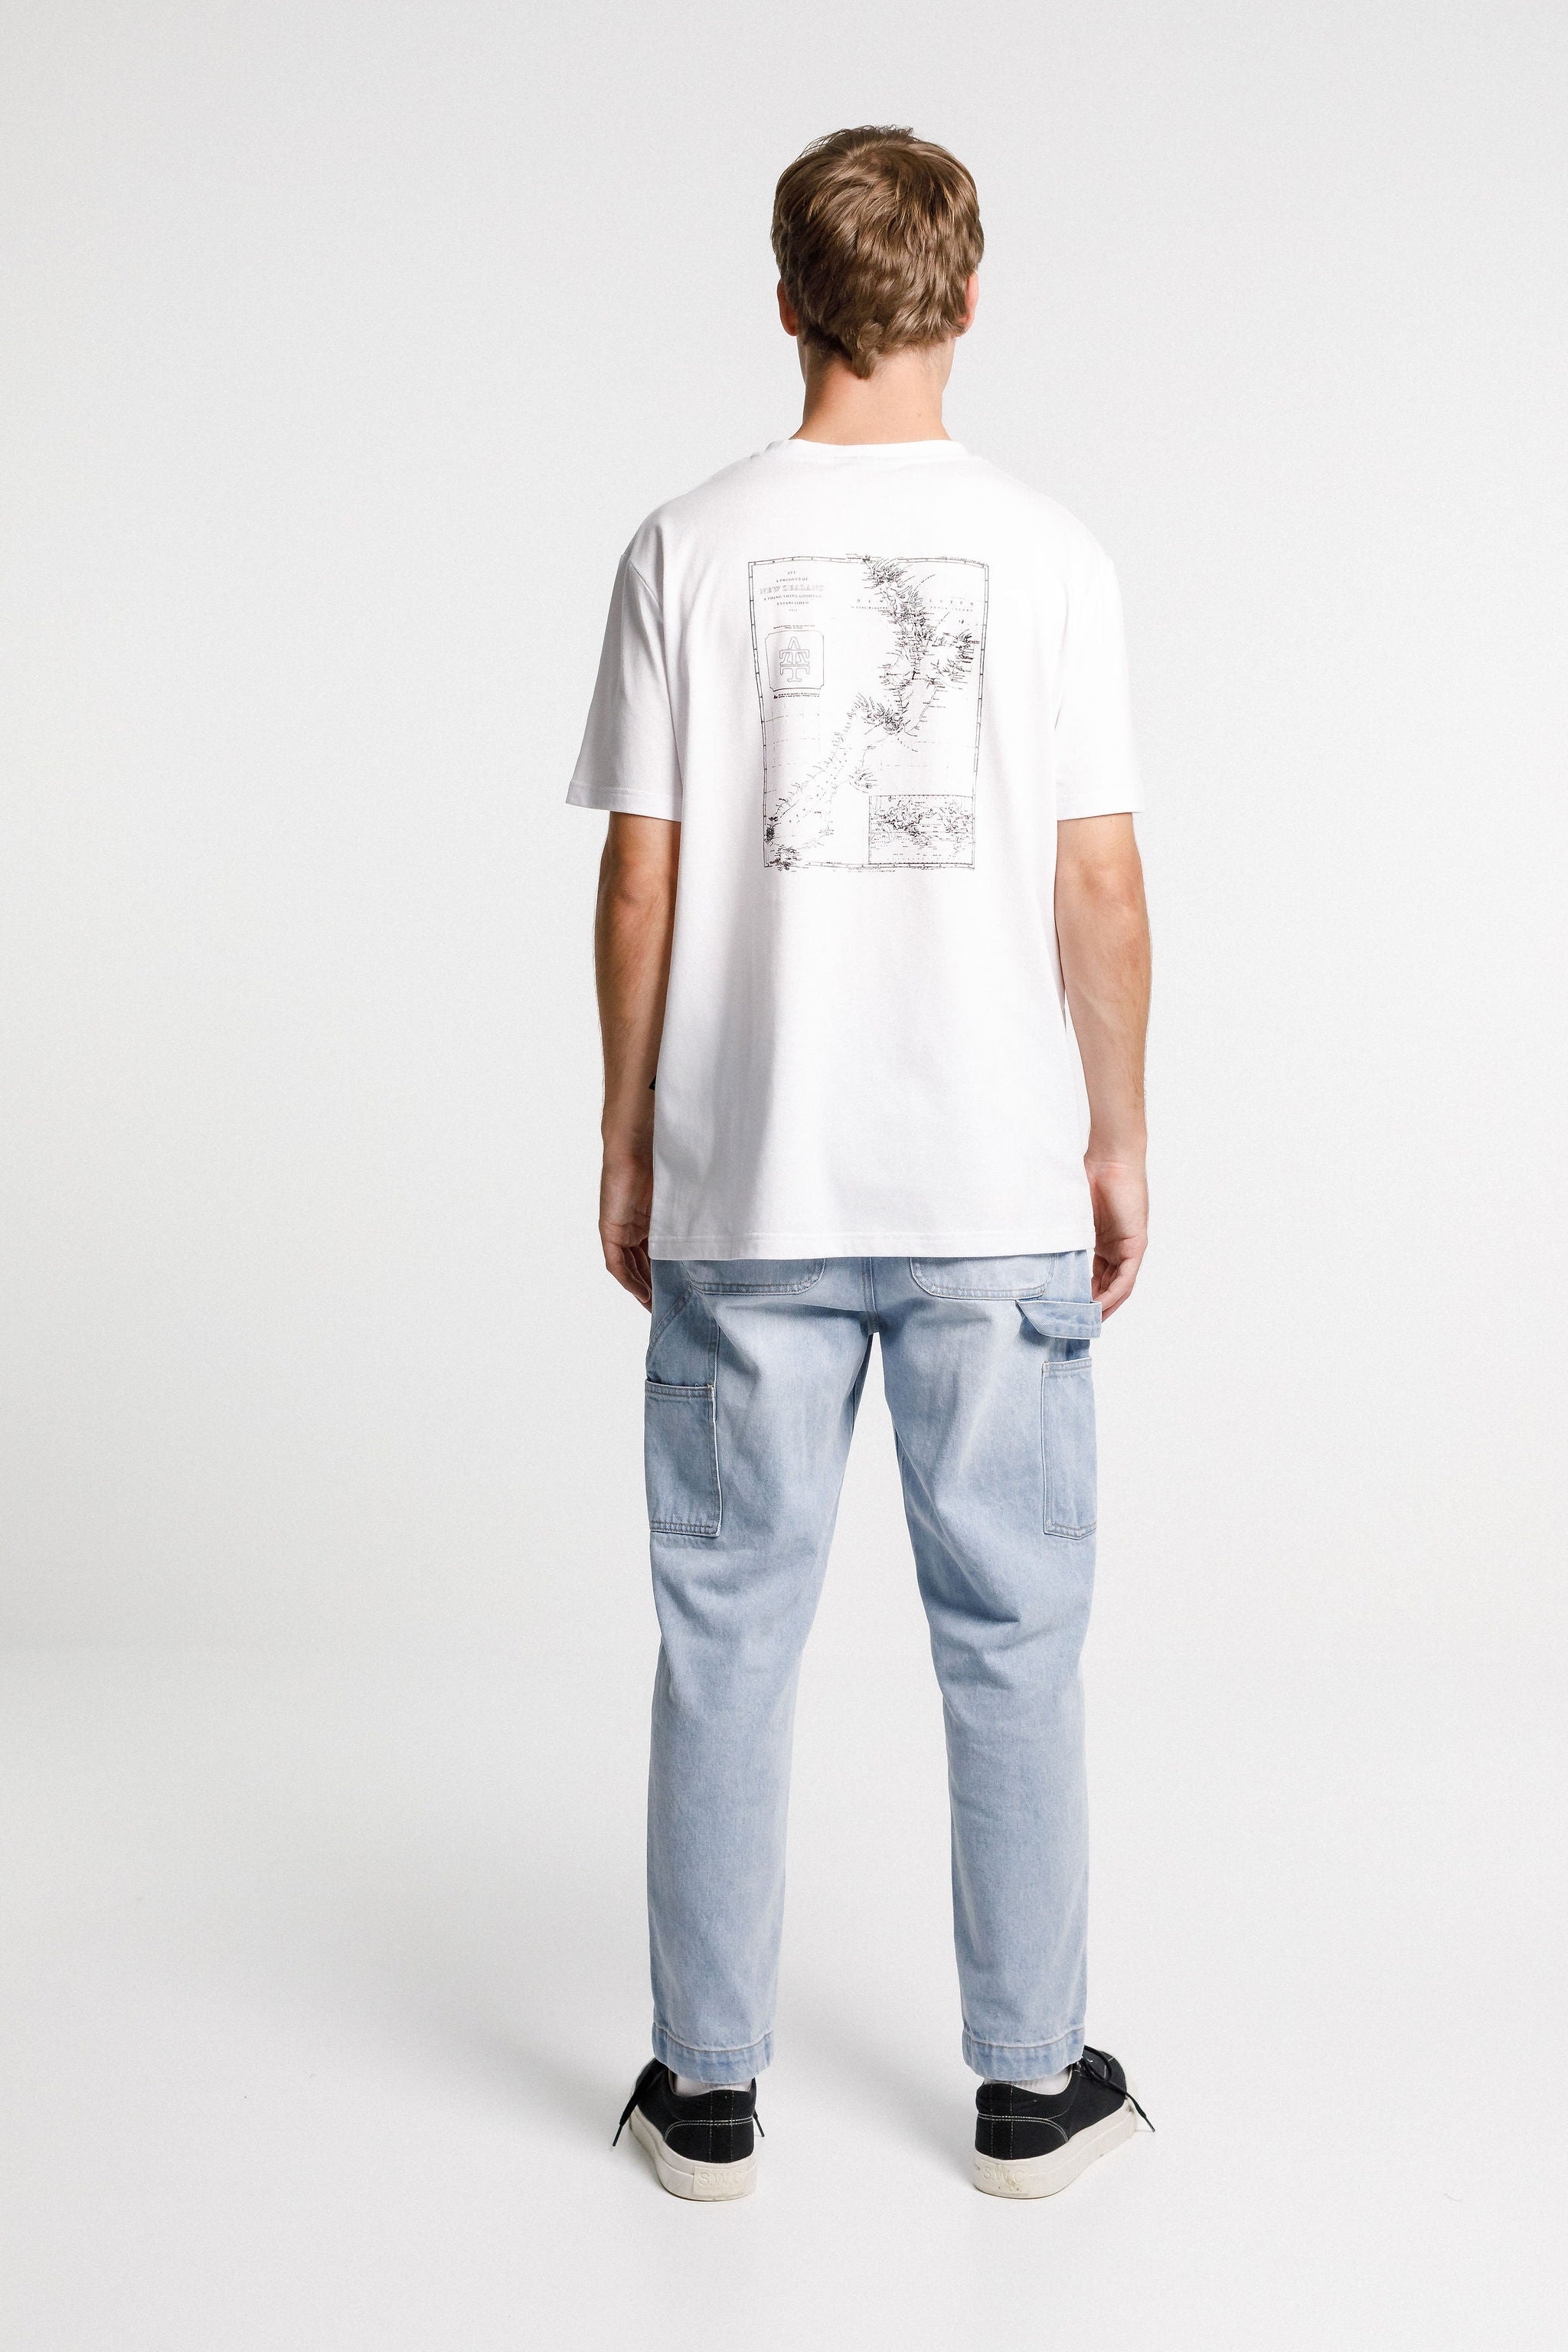 SS Tee - Sale - White with Map Print